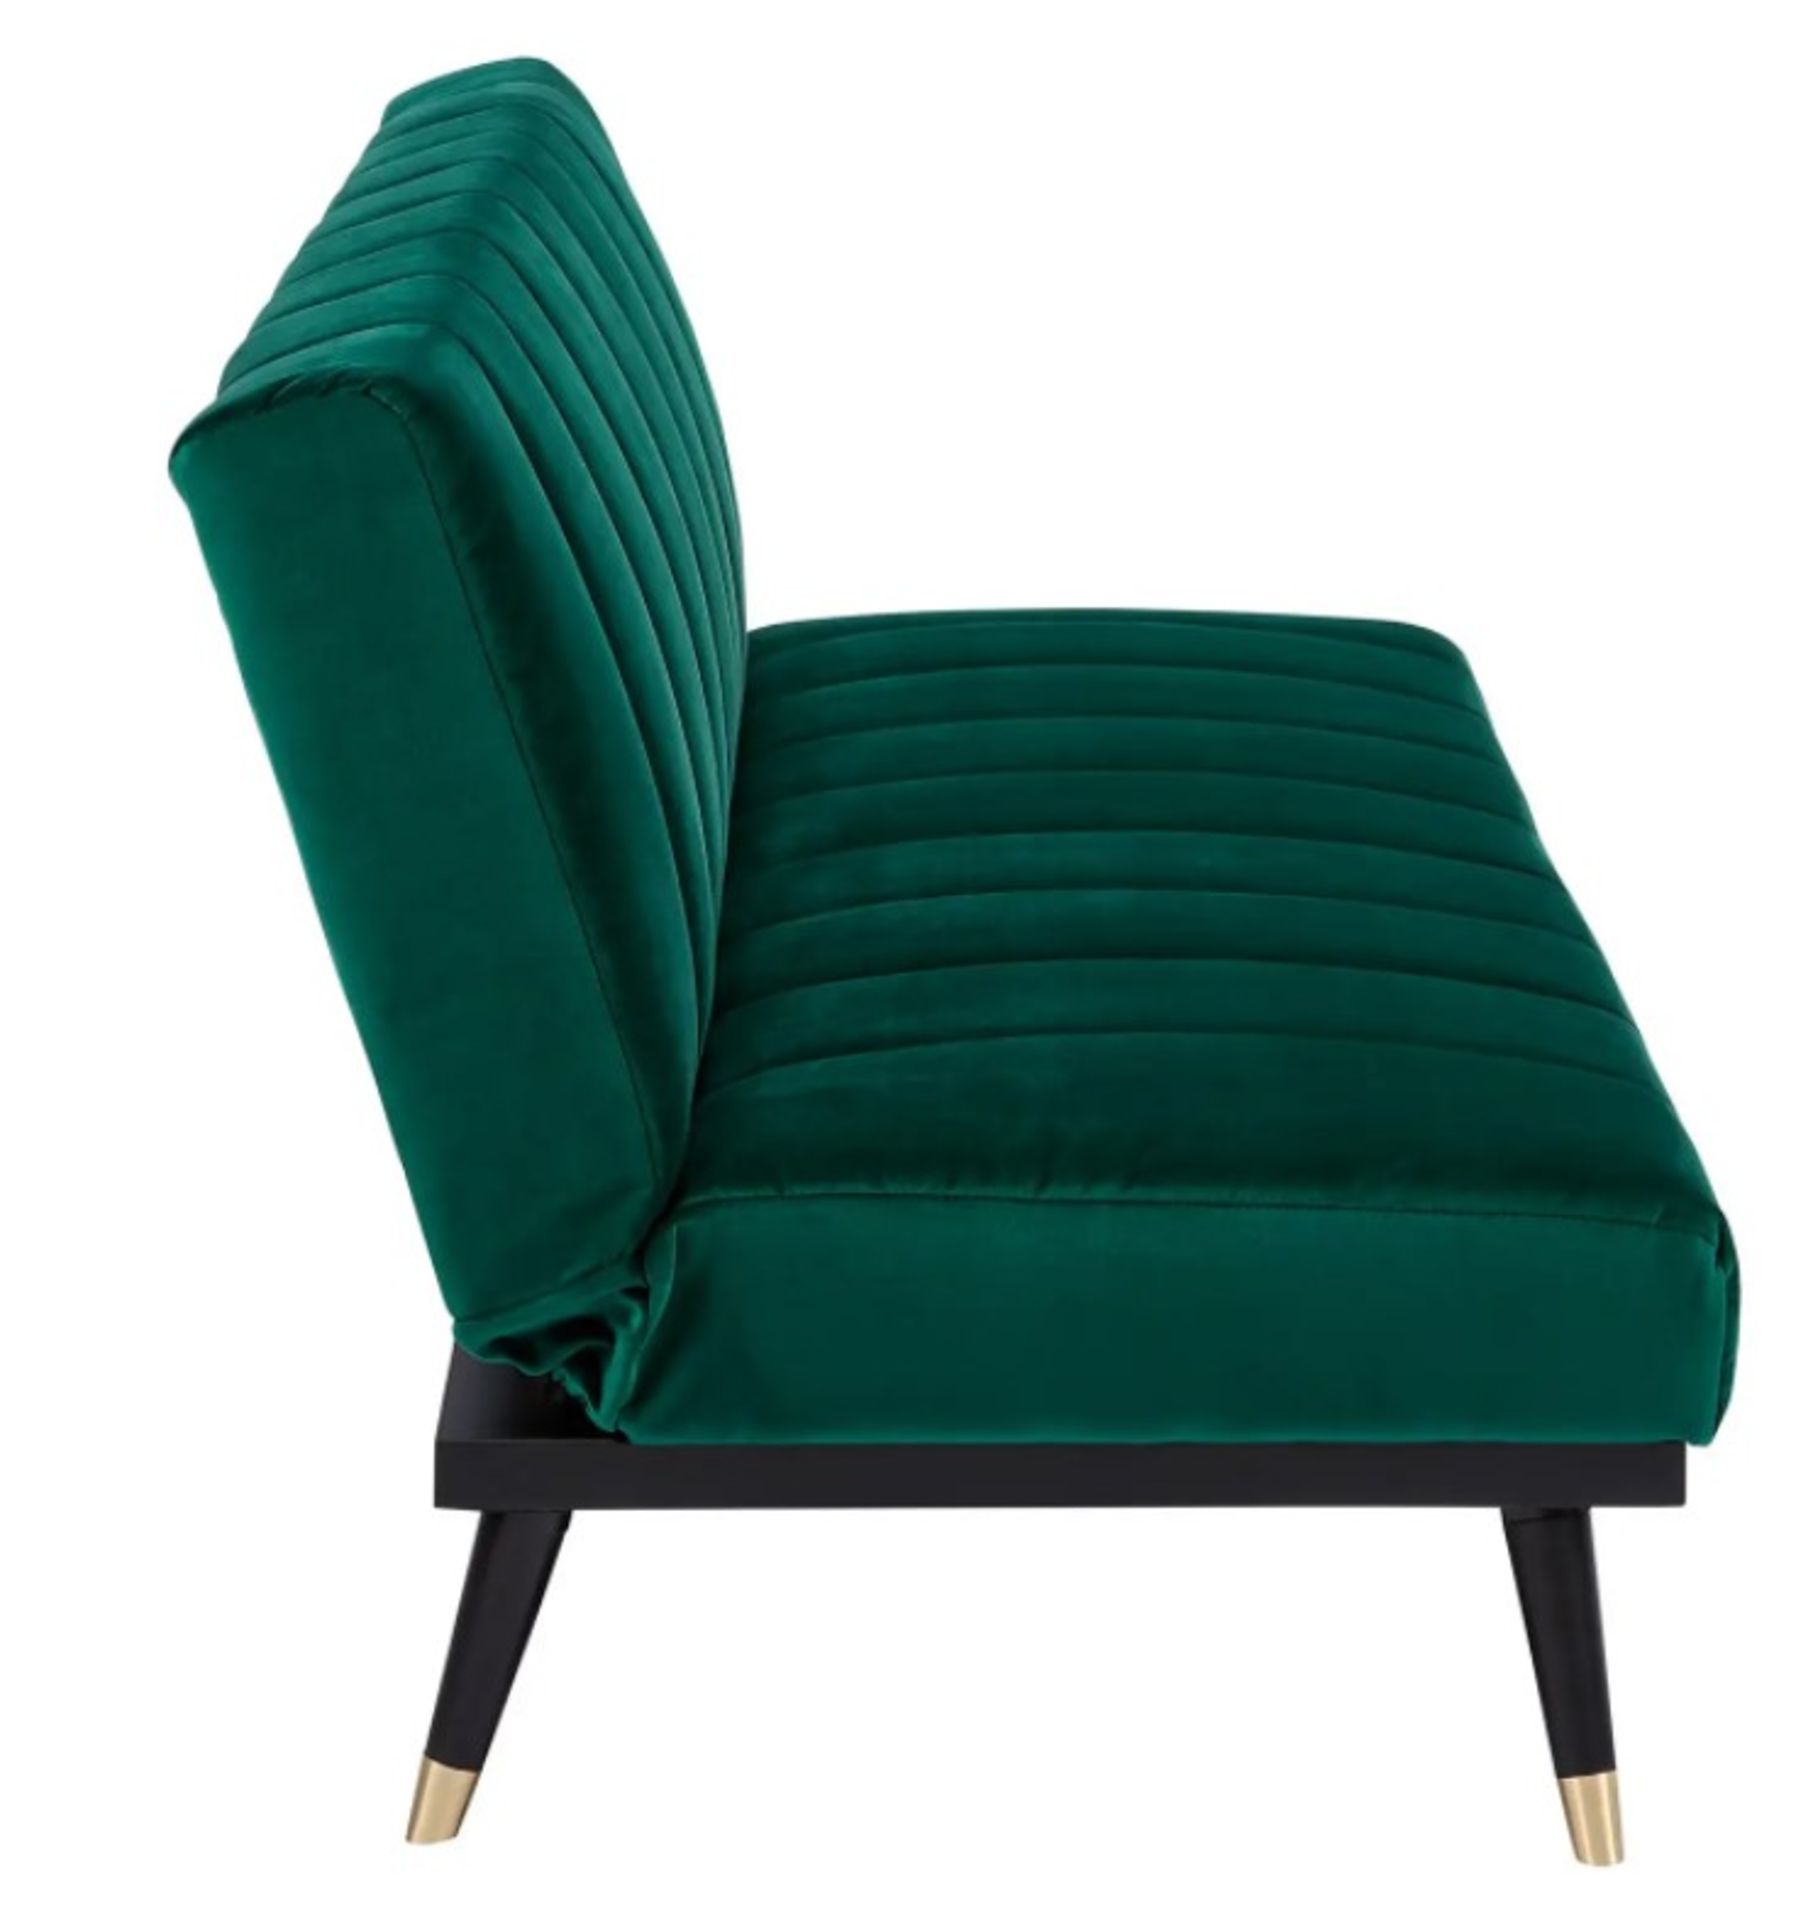 1x Sindy Sofa Bed Luxe Emerald Green (With Legs) RRP £250. Sofa : (H)82 x (W)181 x (D)83cm. Sofa - Image 4 of 7